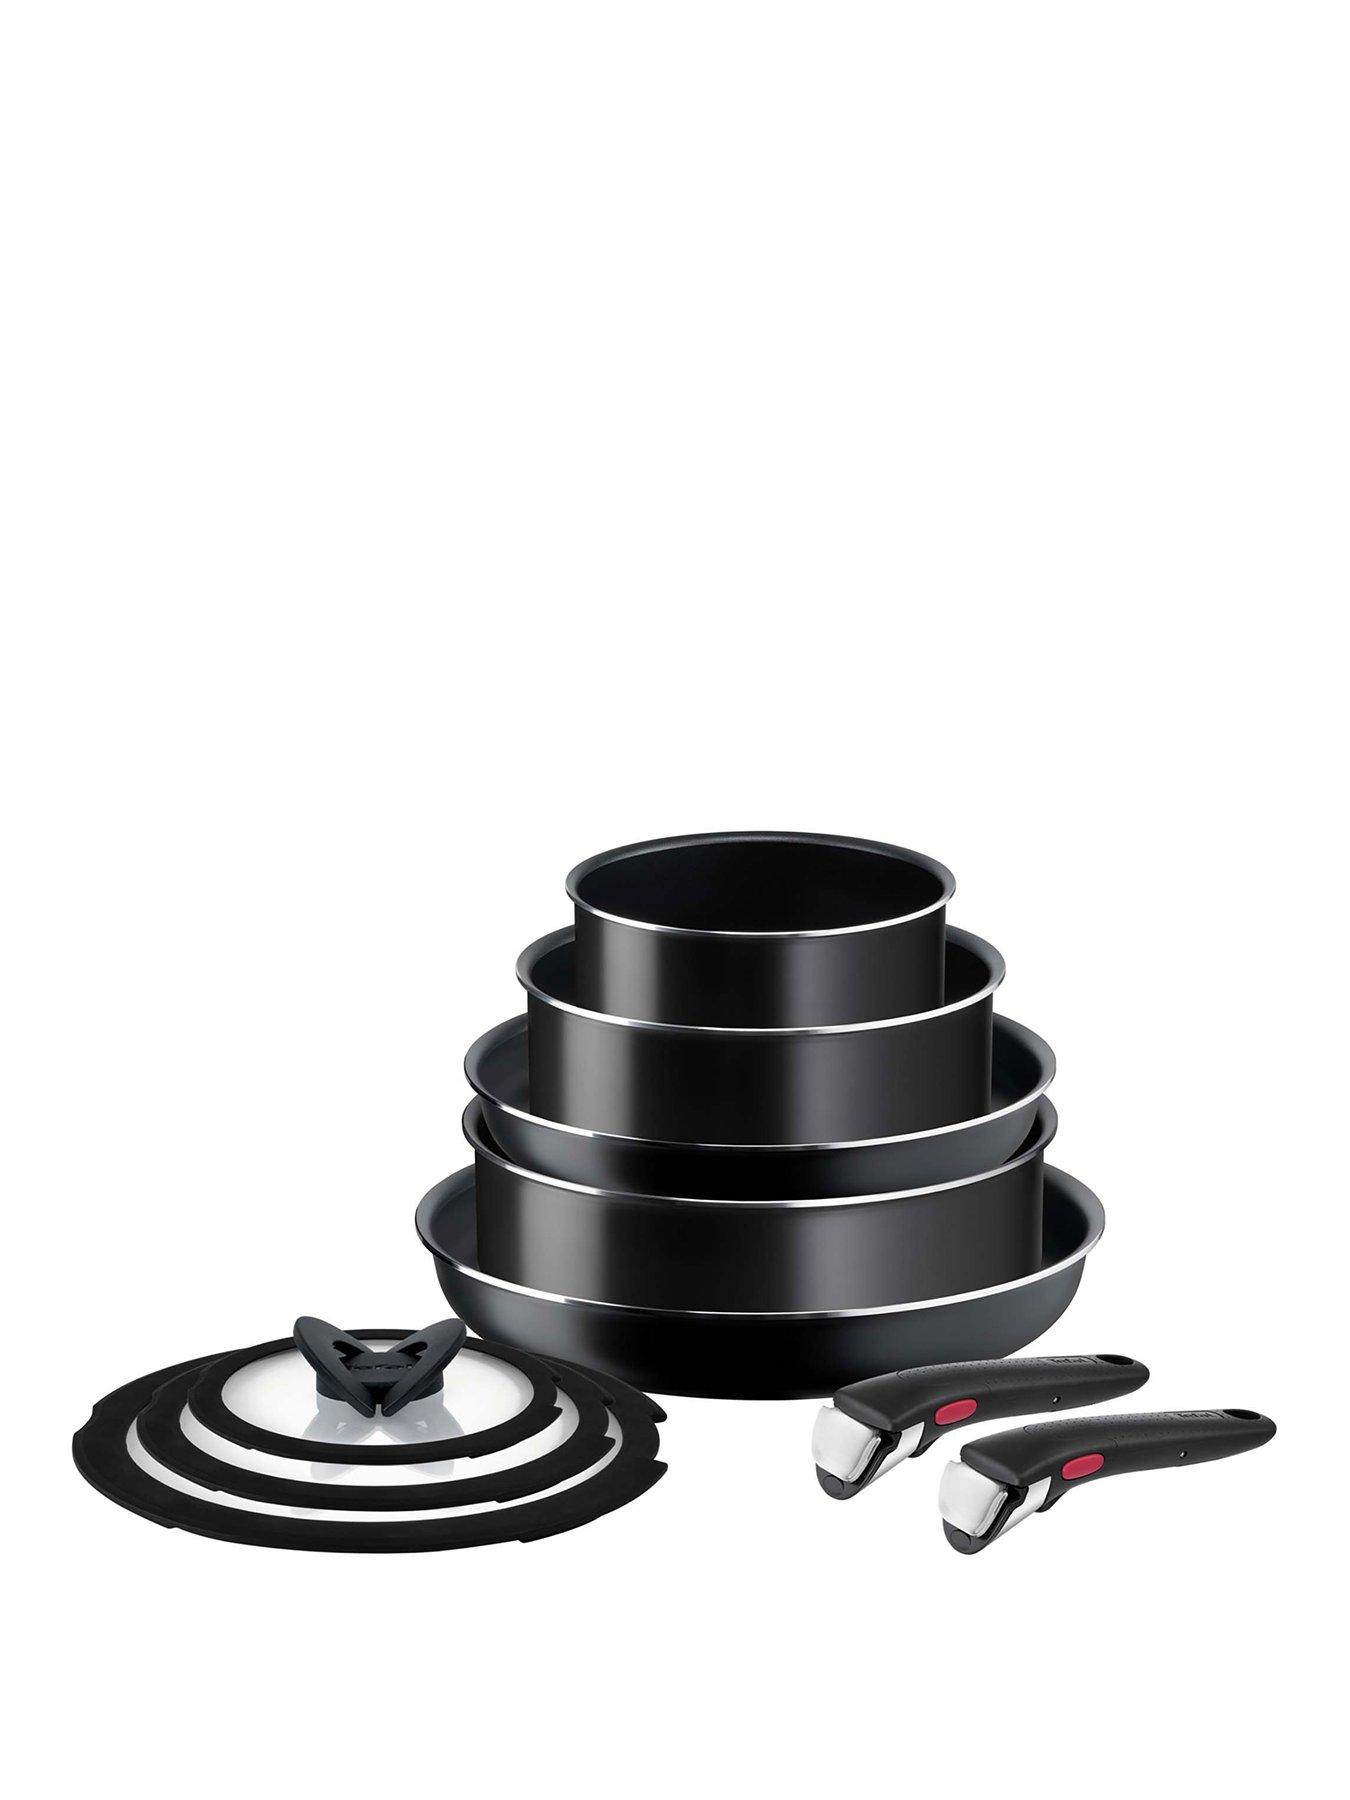 Russell Hobbs COMBO-2093 4 Piece Pan Set and 24 CM Casserole Pan Stainless Steel 